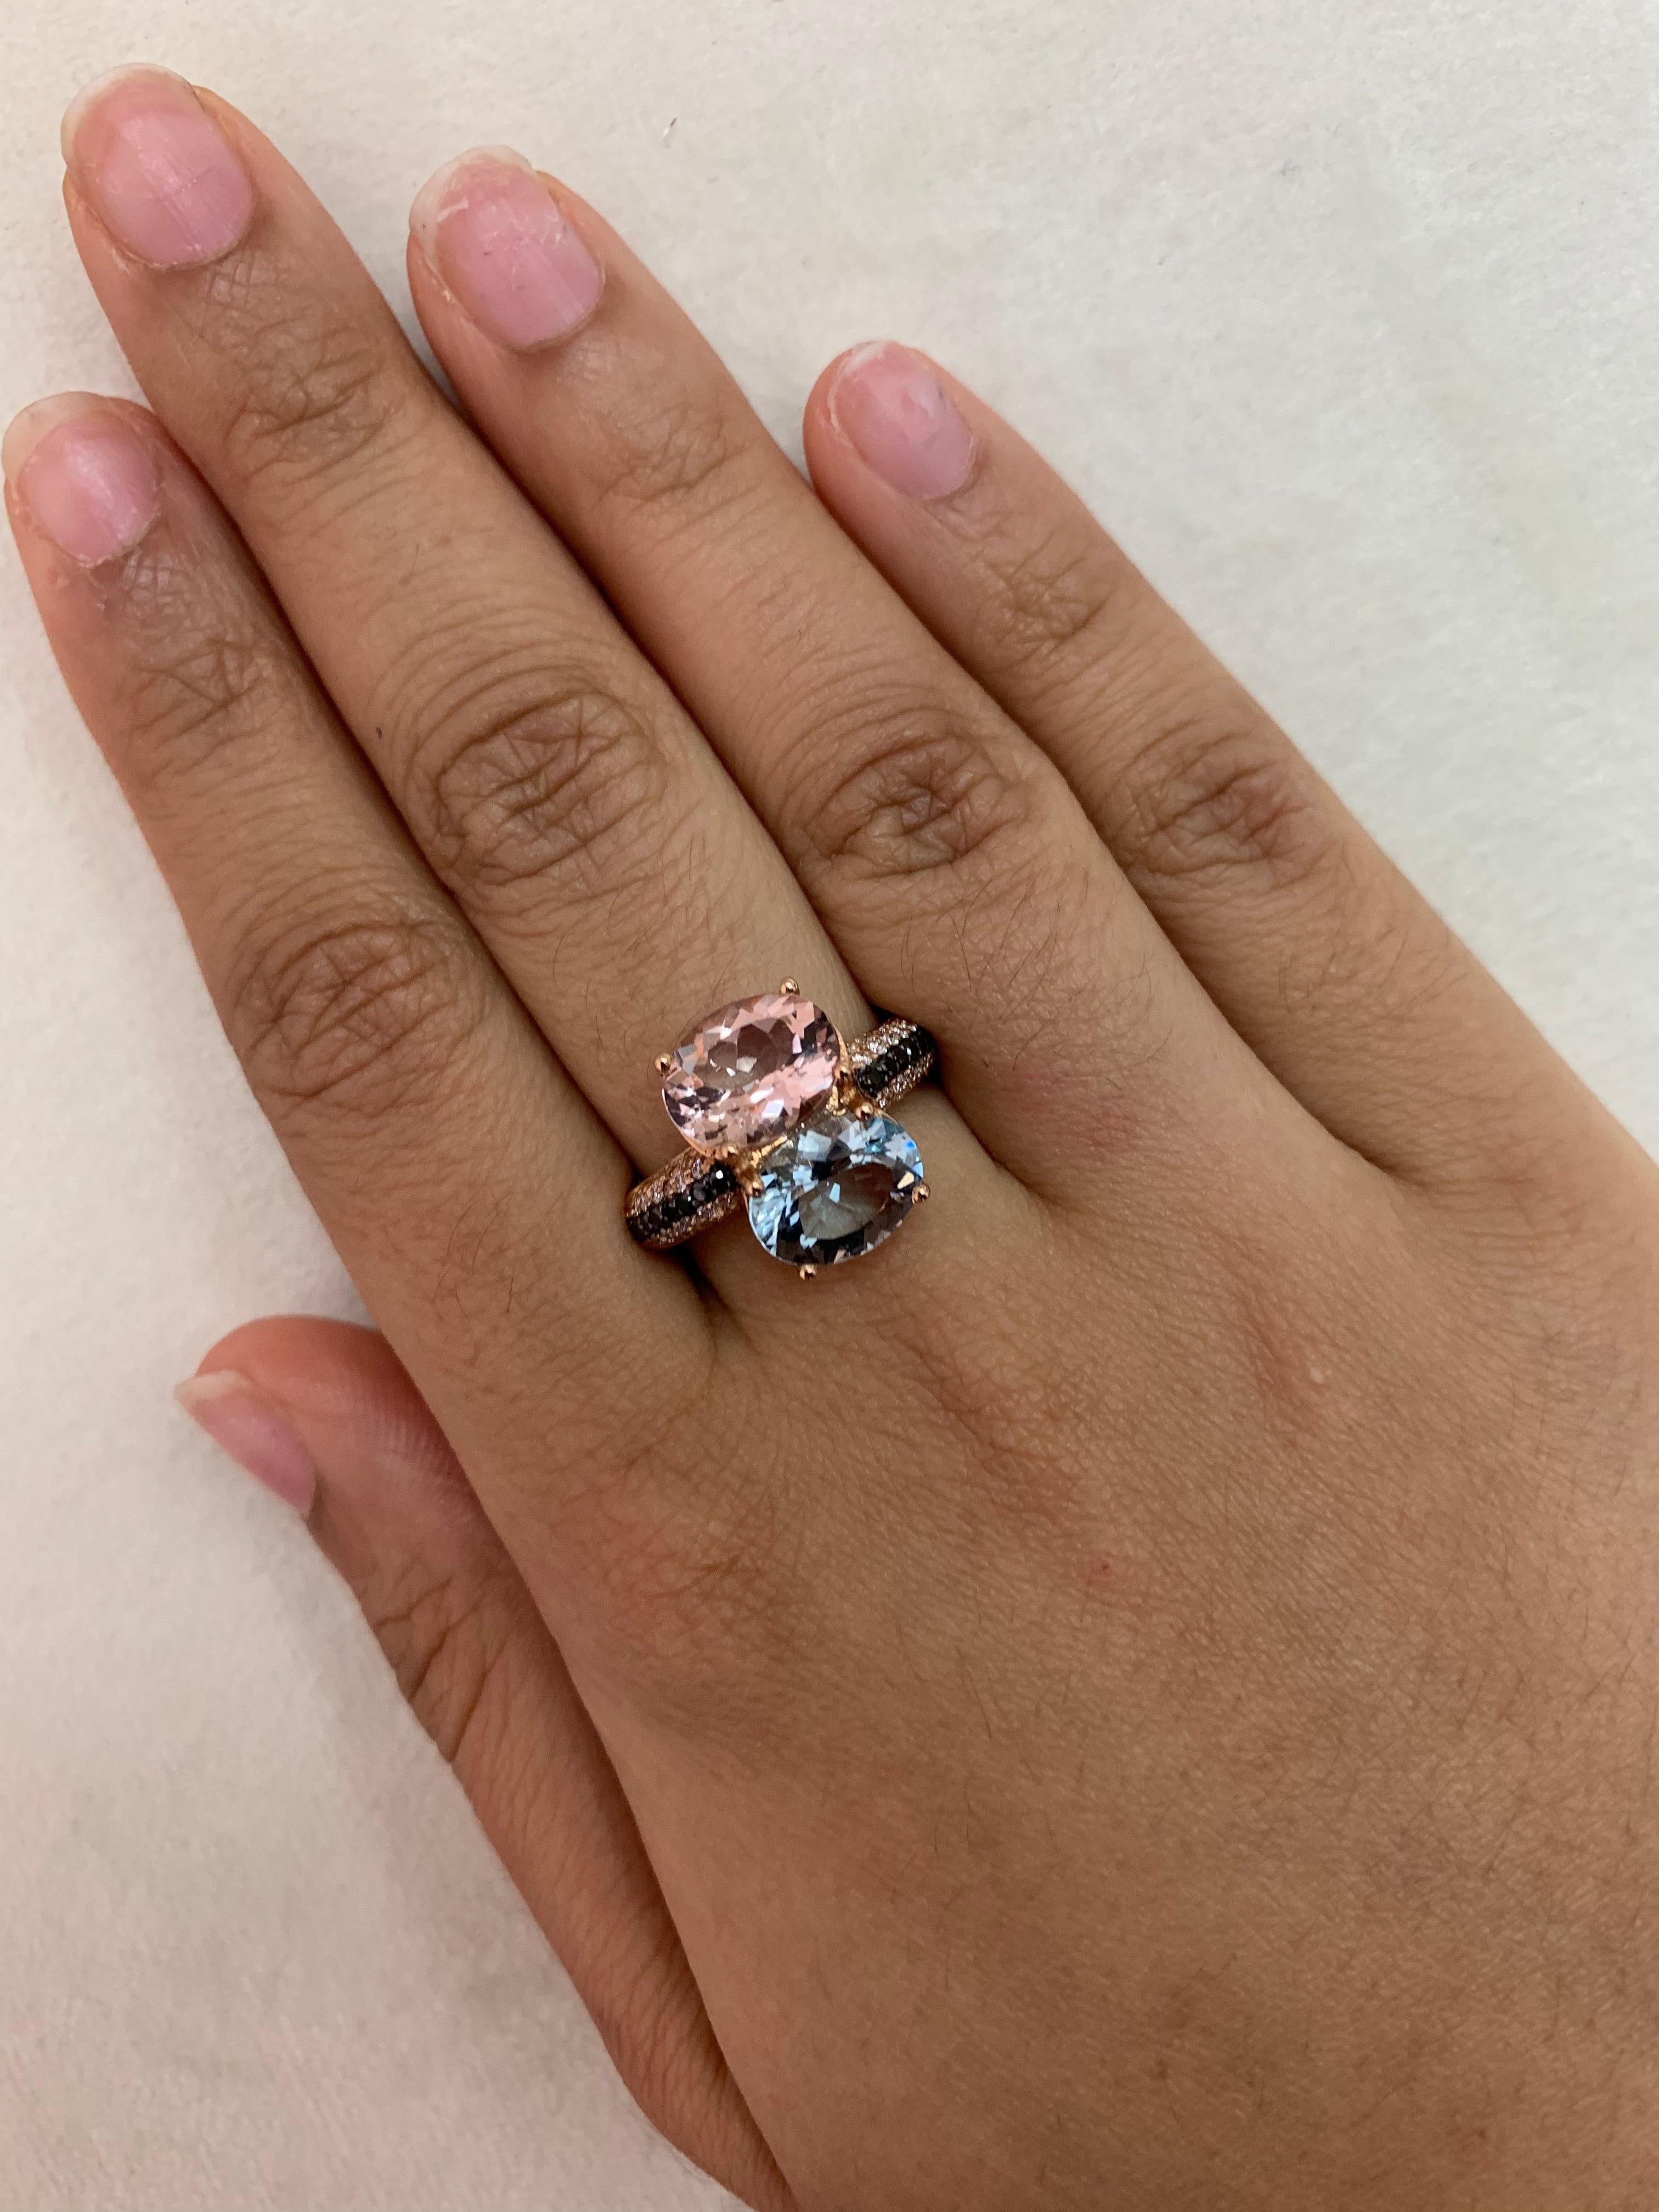 A classic summer ring featuring the warm tones of morganite and aquamarines! Accented with black and white diamonds this ring is made in rose gold and presents a classic yet elegant look. 

Classic morganite and aquamarine ring in 14K rose gold with